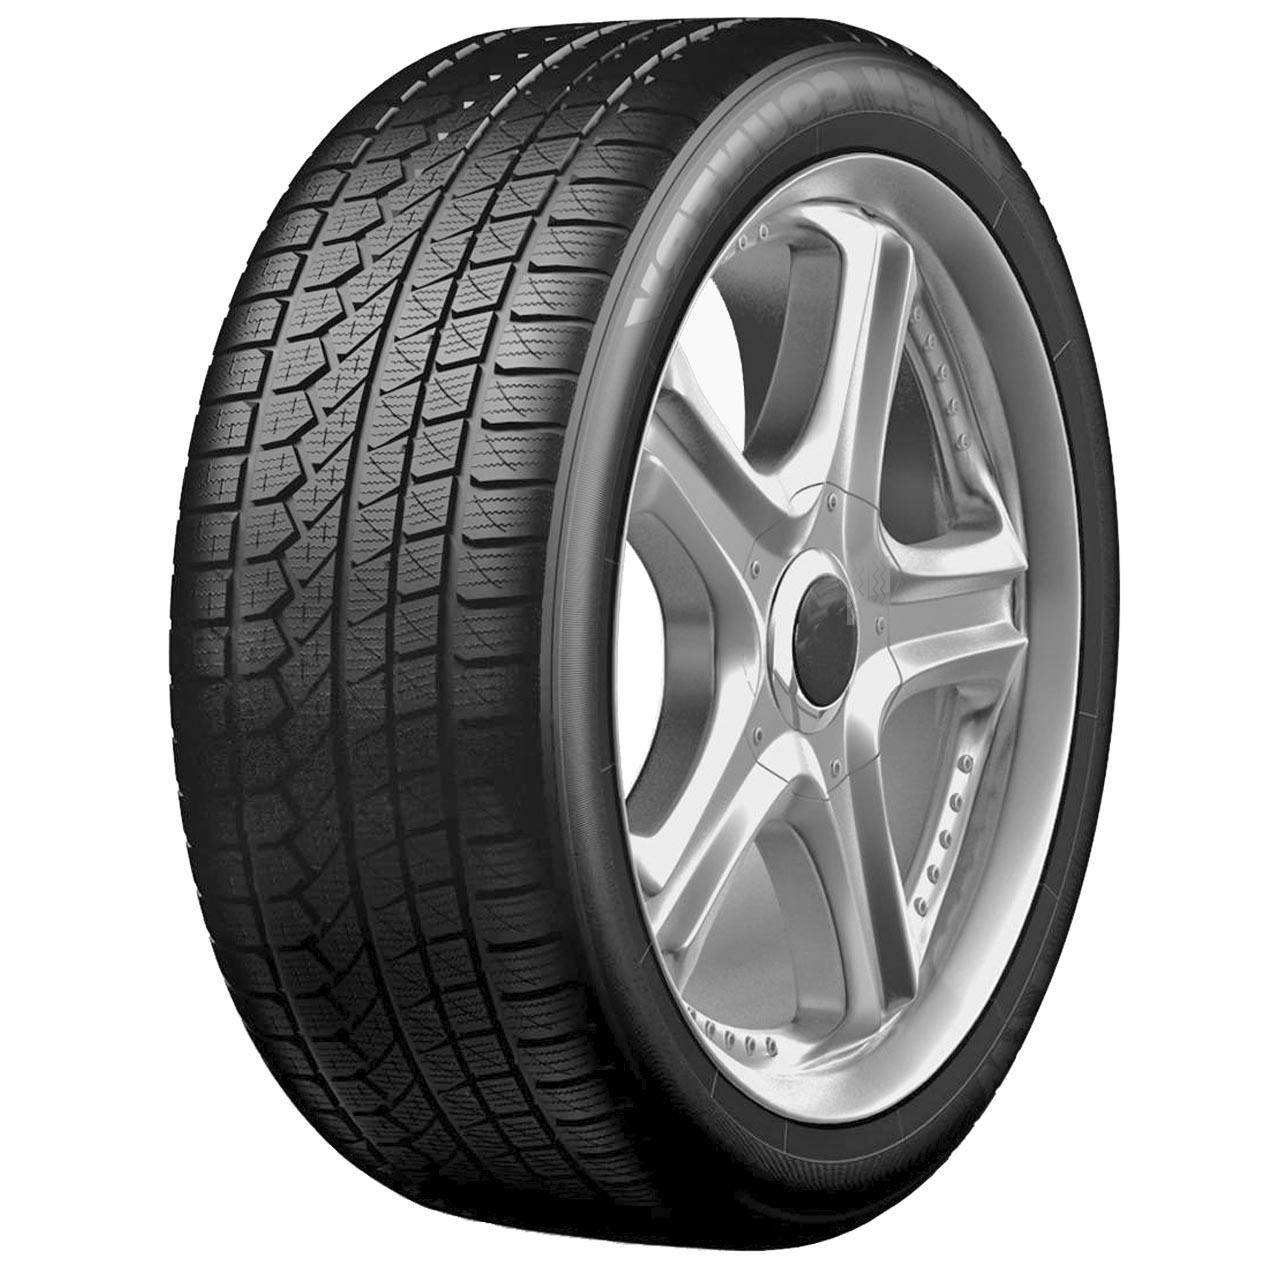 Toyo 225/55R18 98V Open Country W/T TL